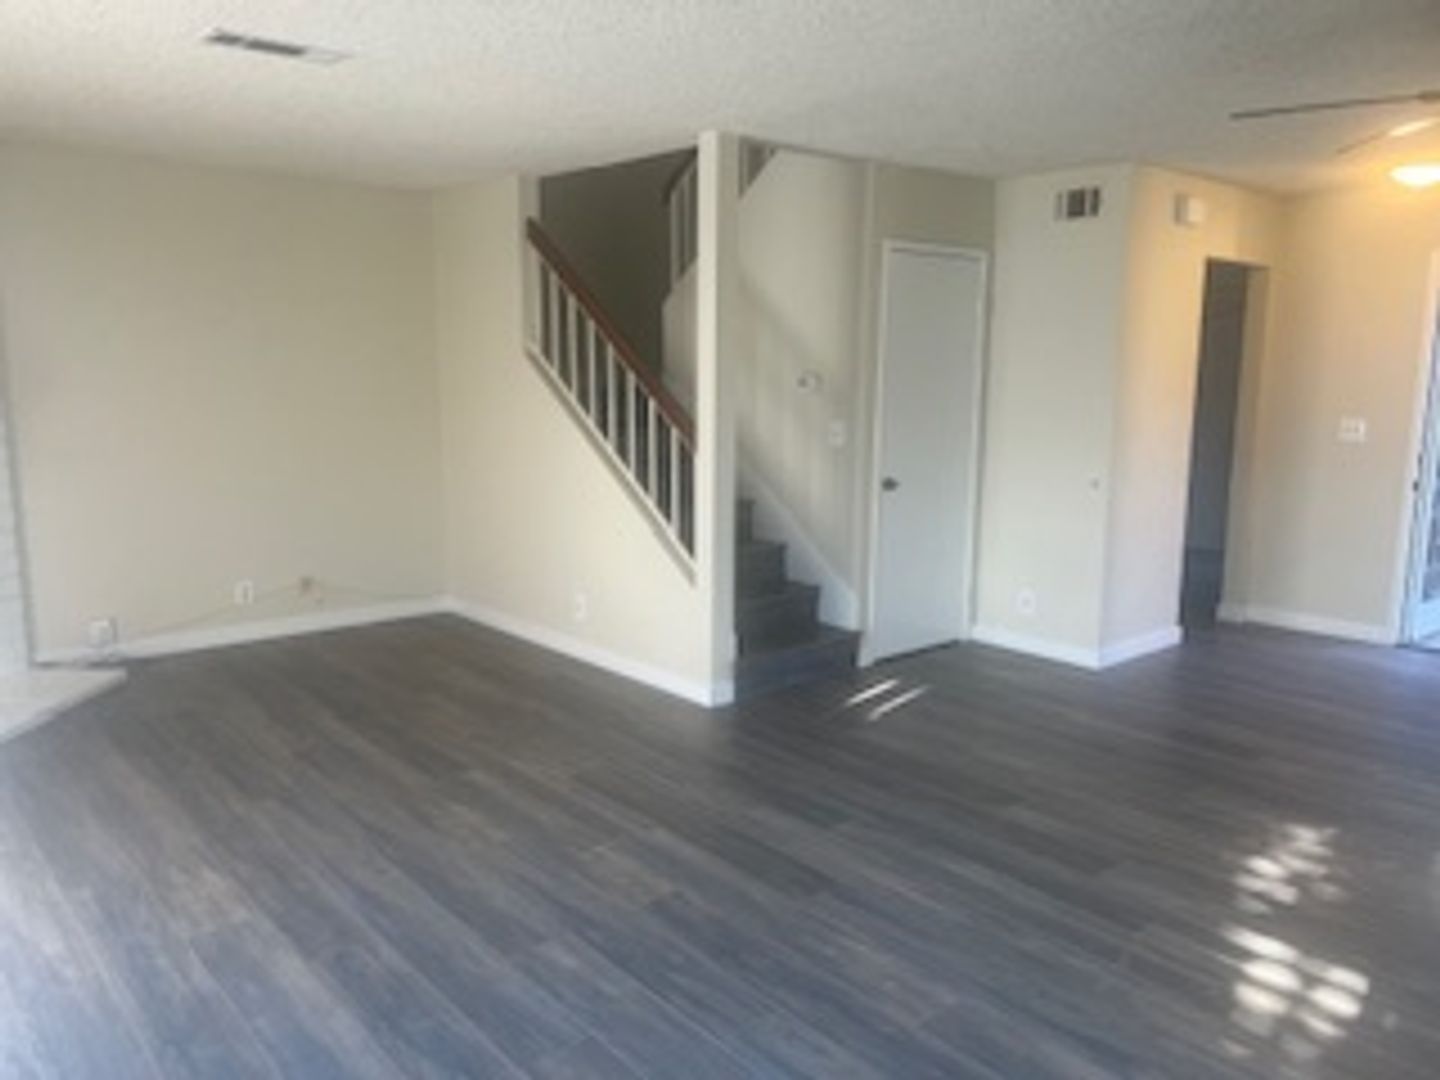 Beautiful 3 Bedroom 2 1/2 Bathroom Simi Valley Home For Lease! Ready for Move-In!